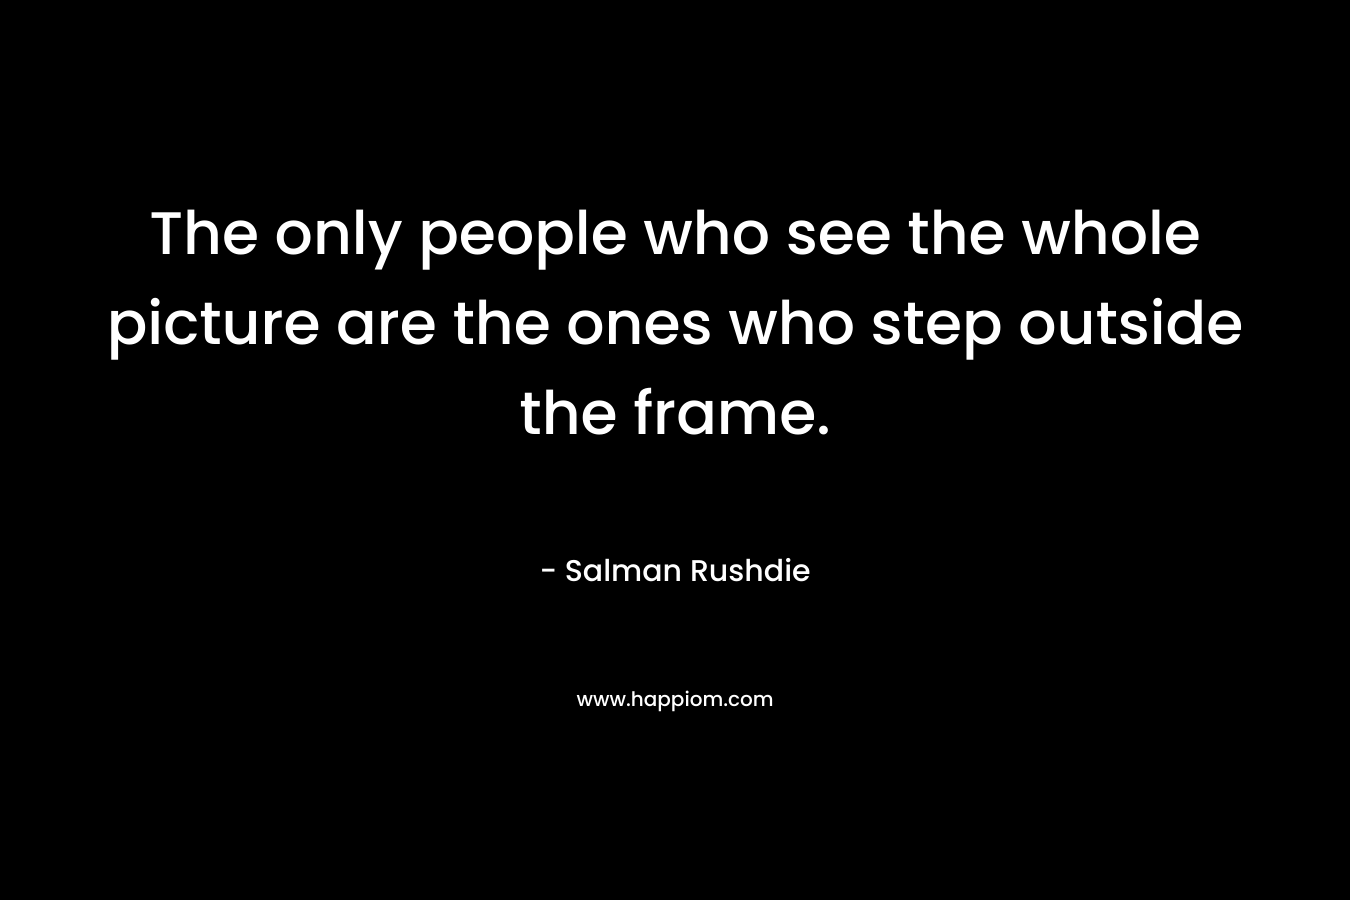 The only people who see the whole picture are the ones who step outside the frame.